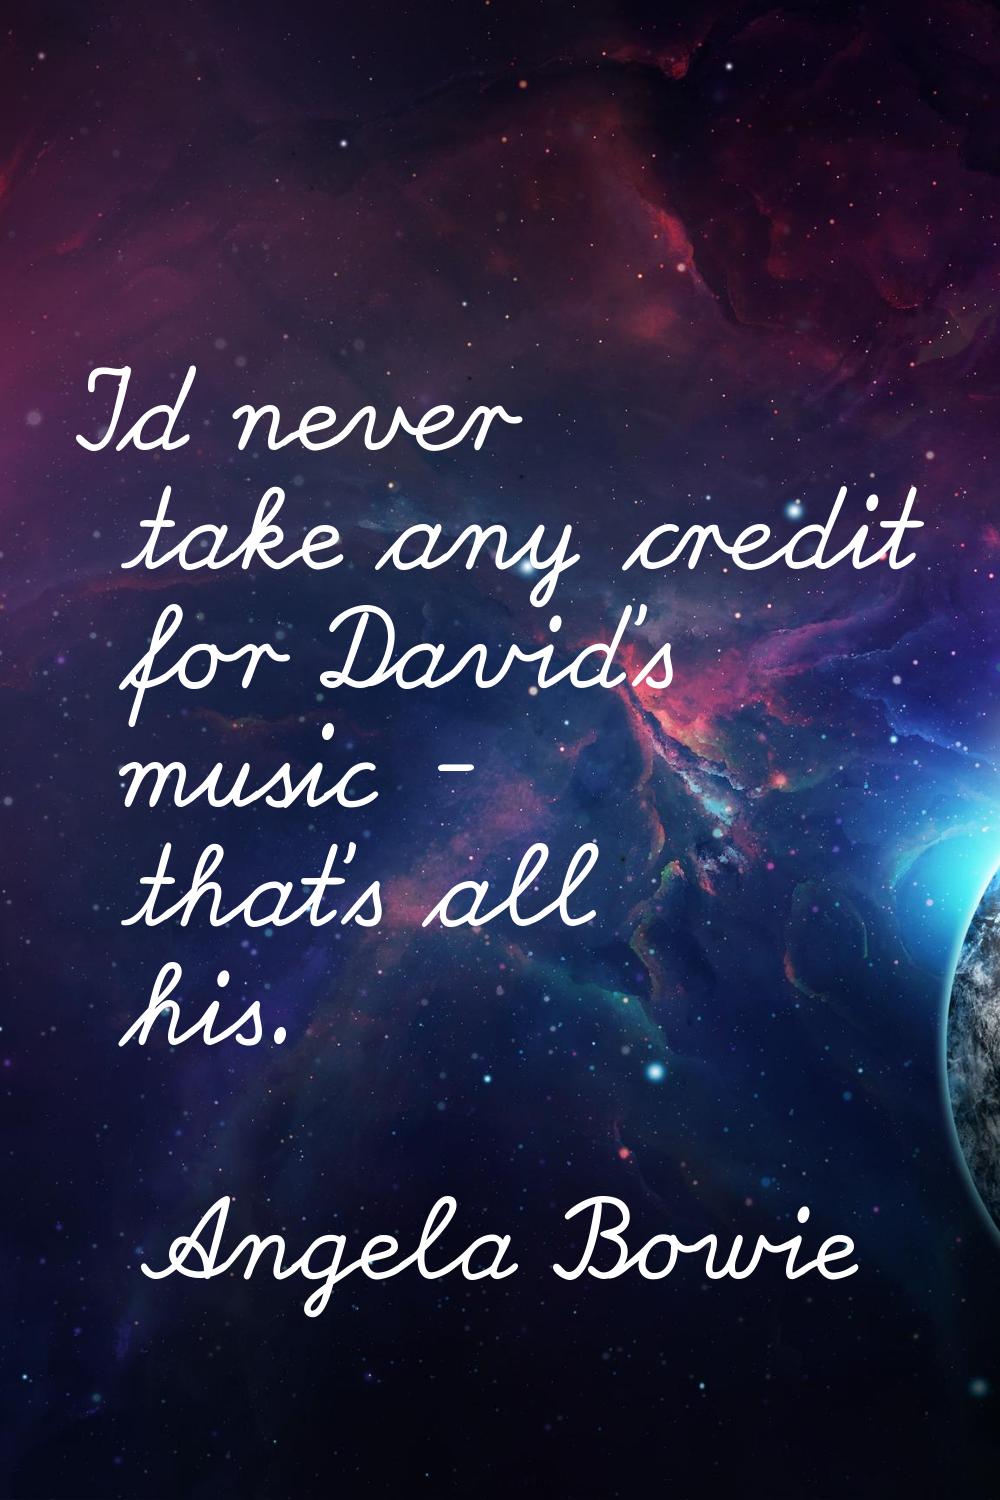 I'd never take any credit for David's music - that's all his.